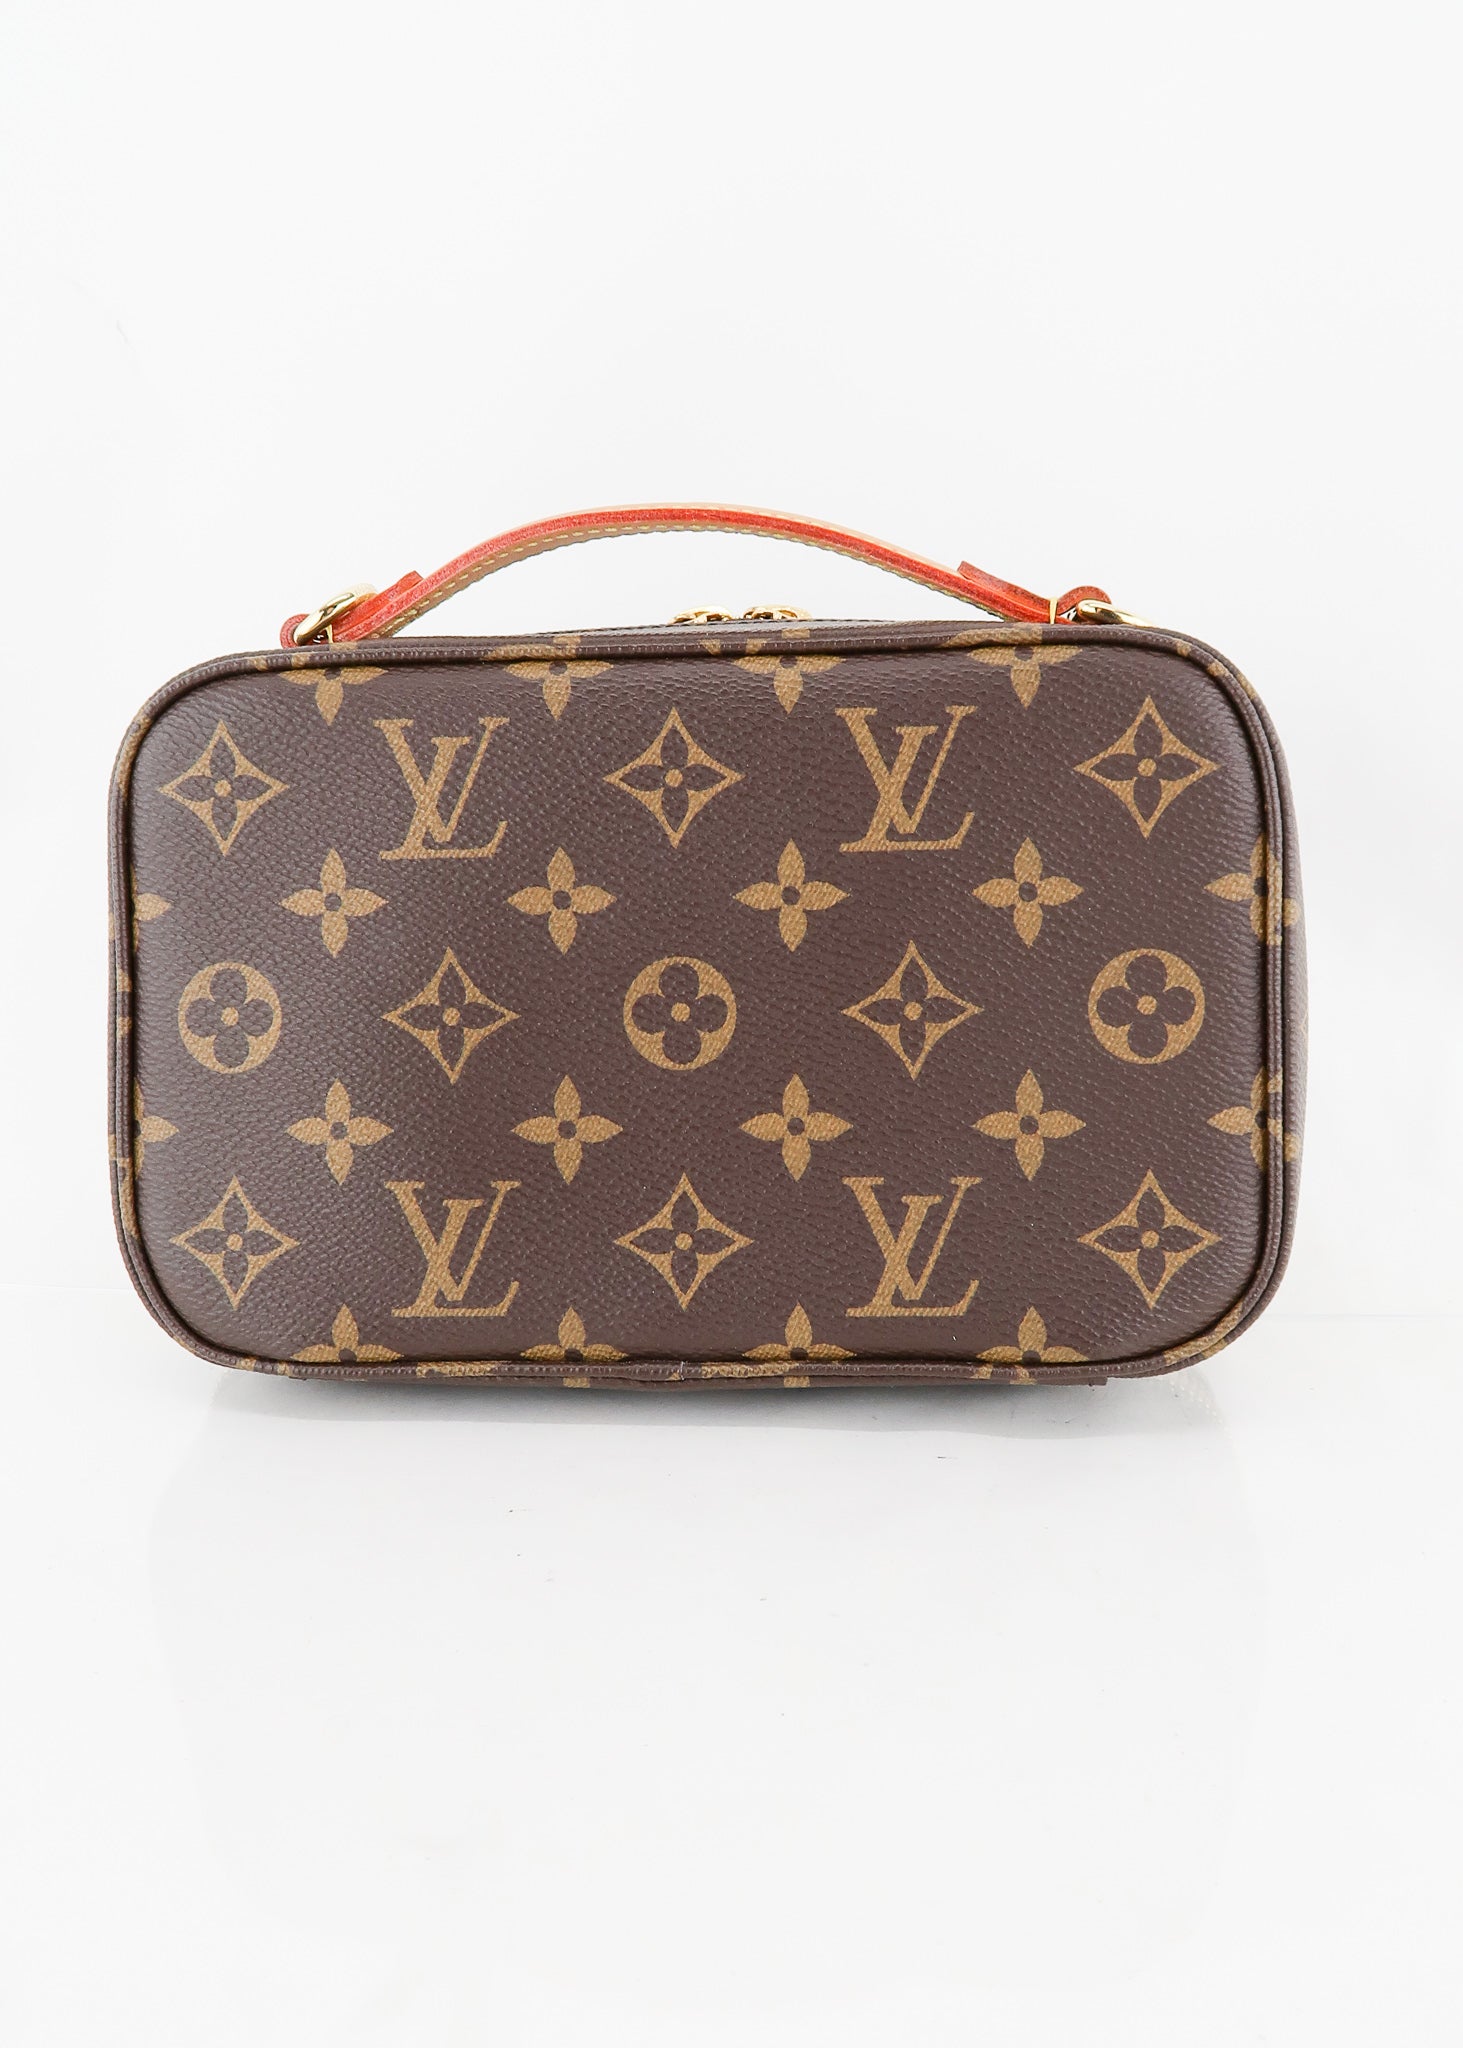 Louis Vuitton Monogram Utility Crossbody Bag Review & What Fits In